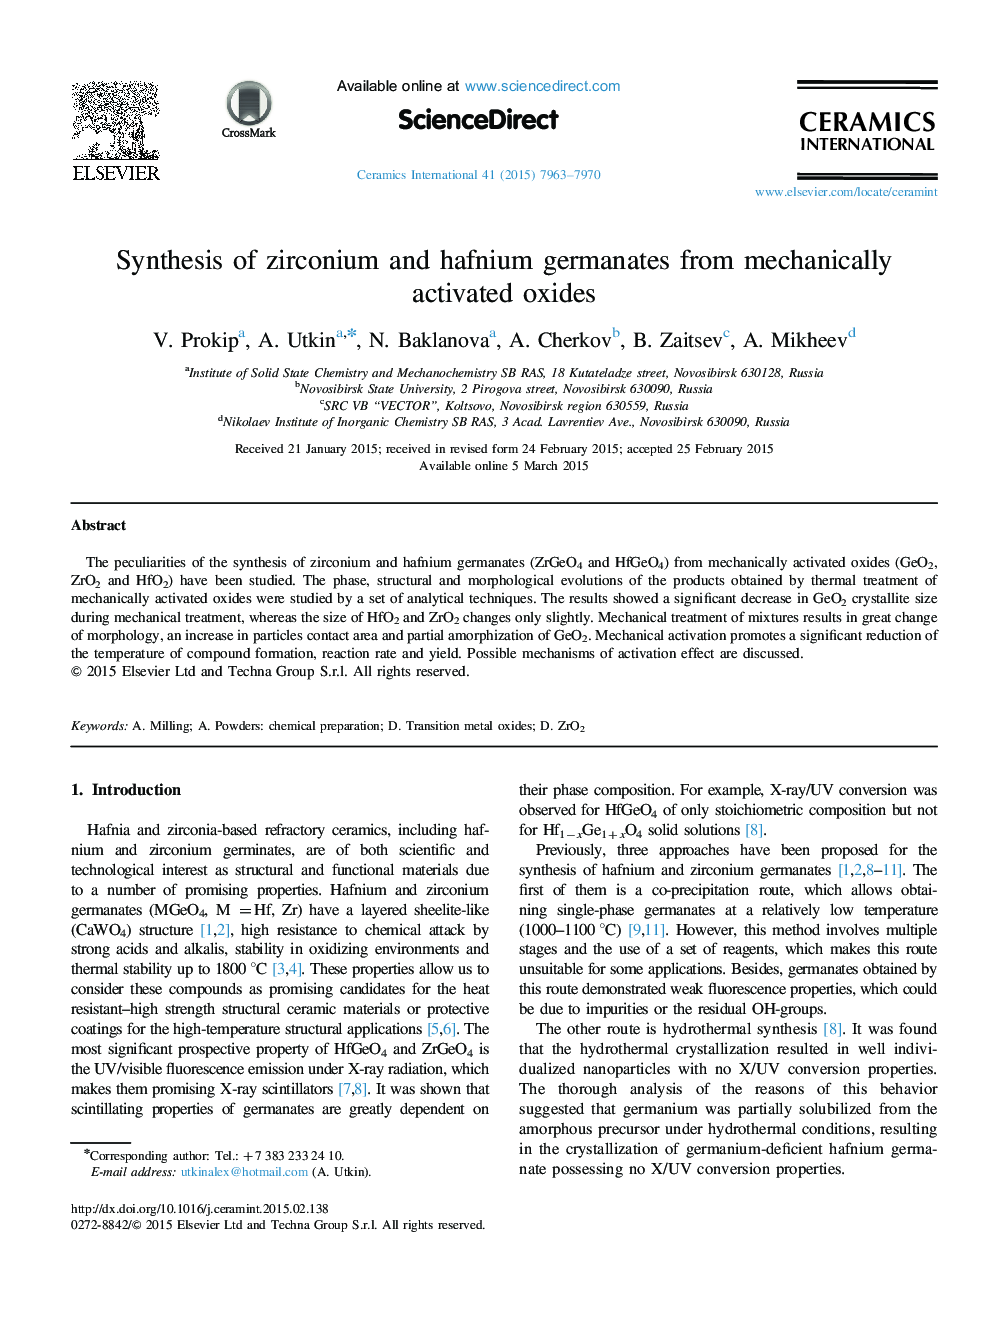 Synthesis of zirconium and hafnium germanates from mechanically activated oxides